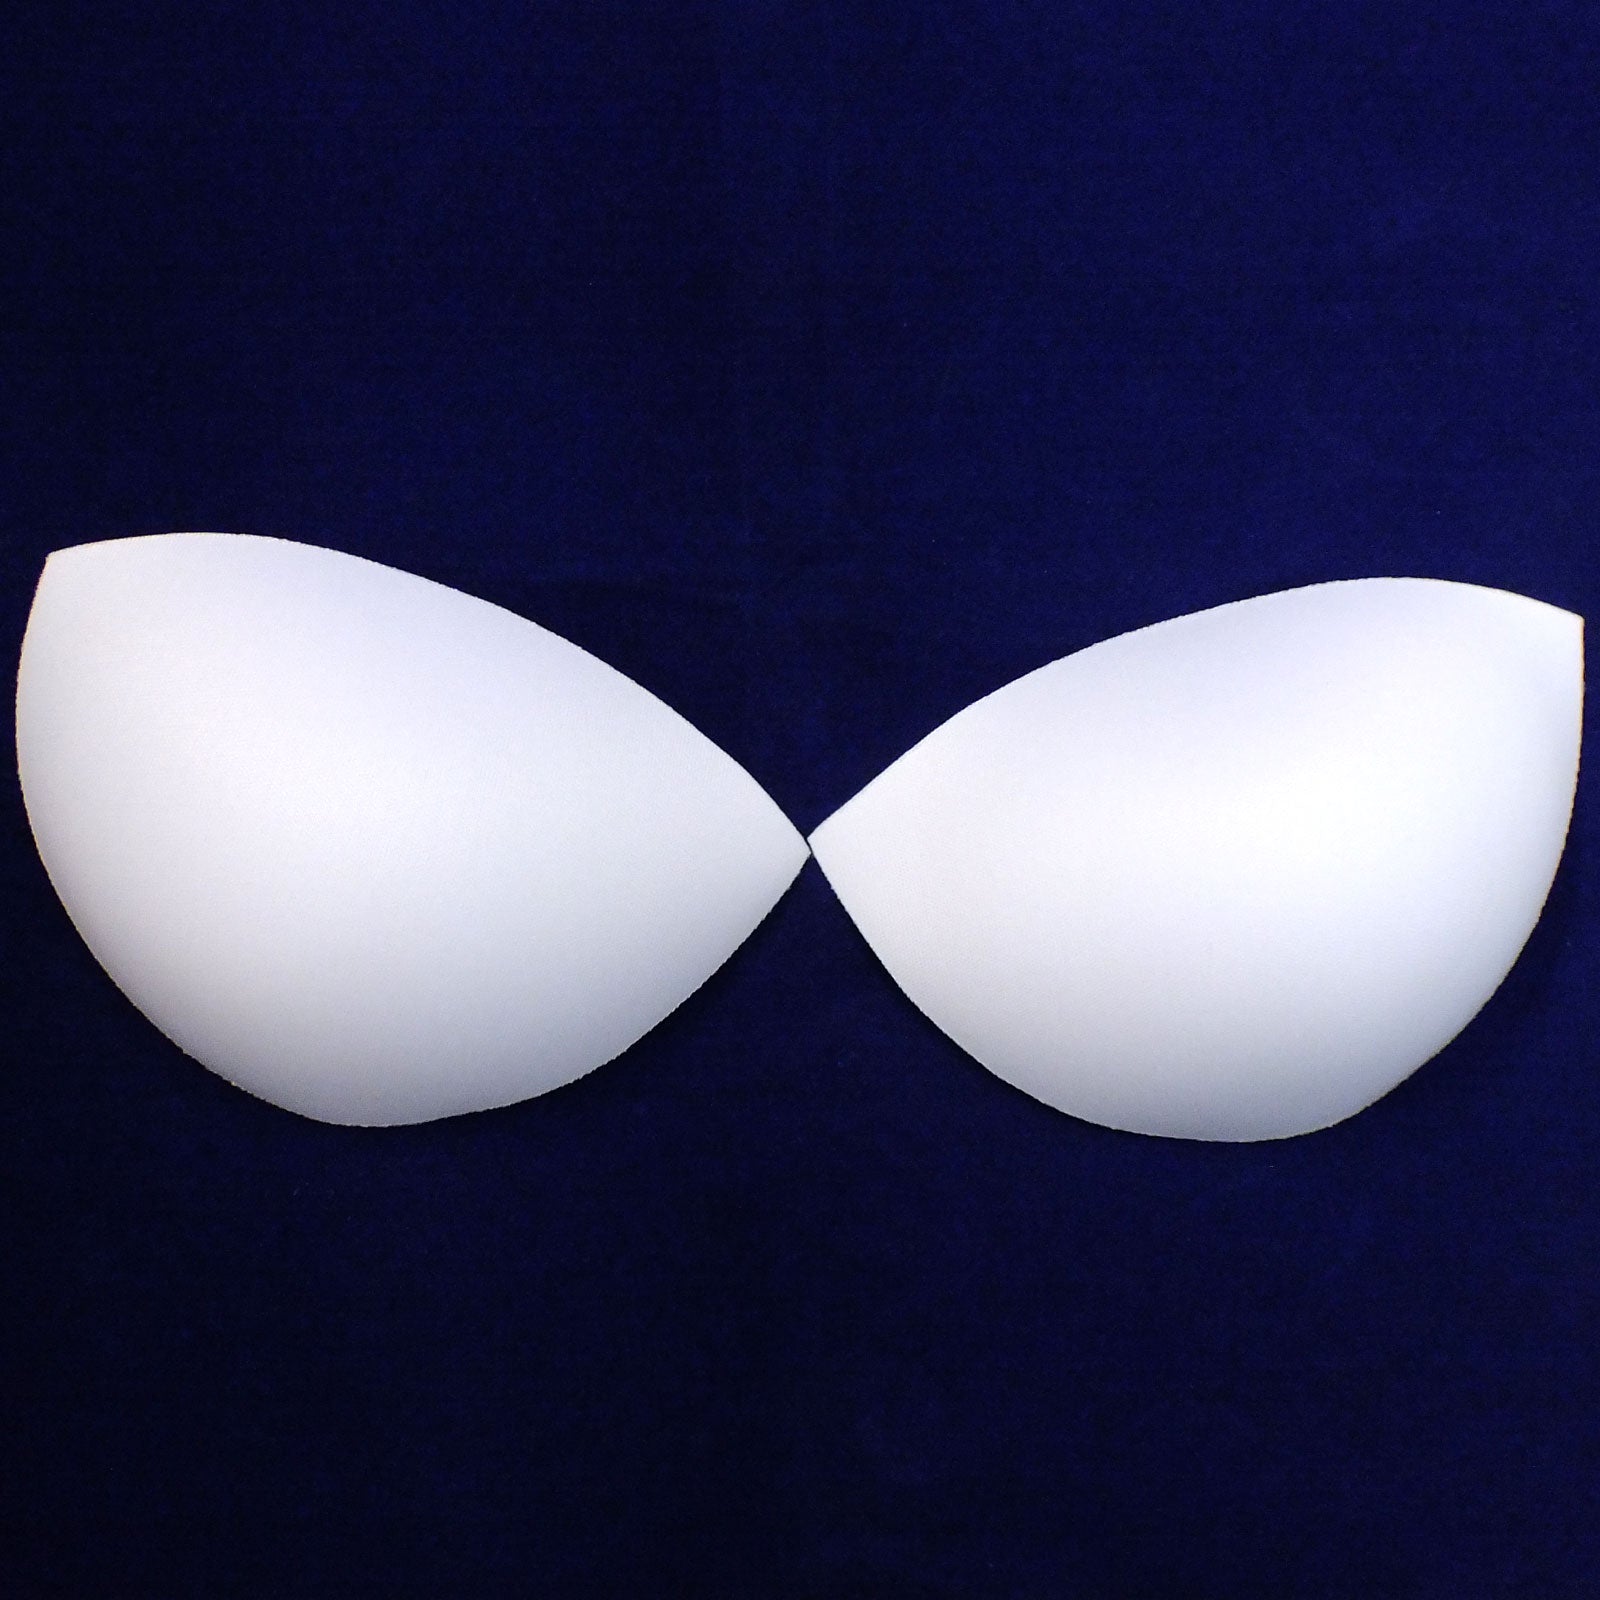 Buy Cotton Foam Bra Cups,White,One Size at